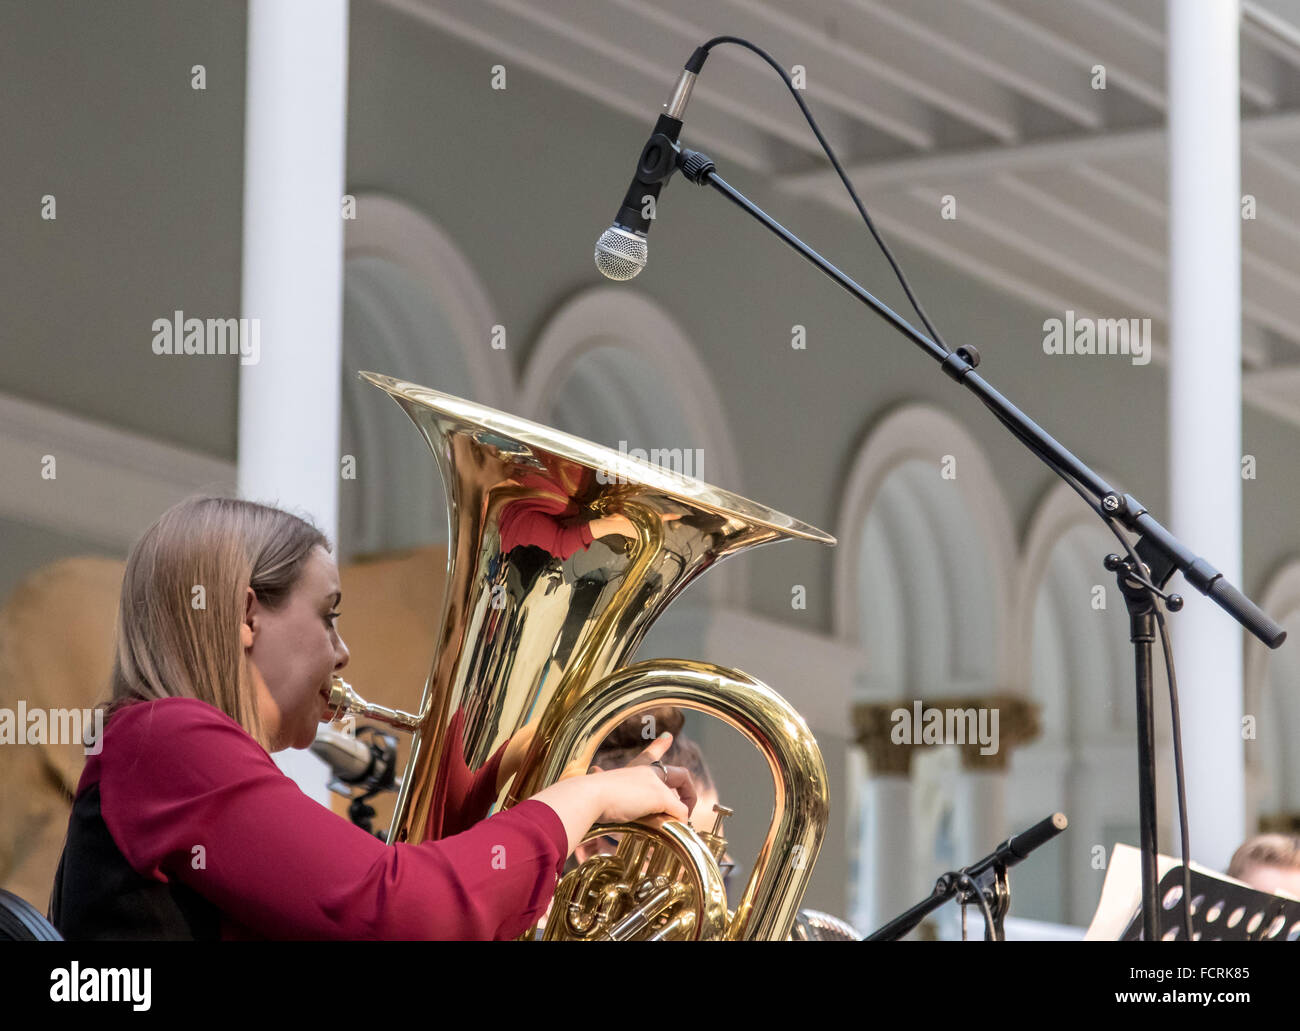 Edimbourg, Ecosse. 24 janvier 2016. Burns, trumbone non event player au Scottish National Museum, Chambers Street, Édimbourg. Credit : Tracey Largue/Alamy Live News Banque D'Images